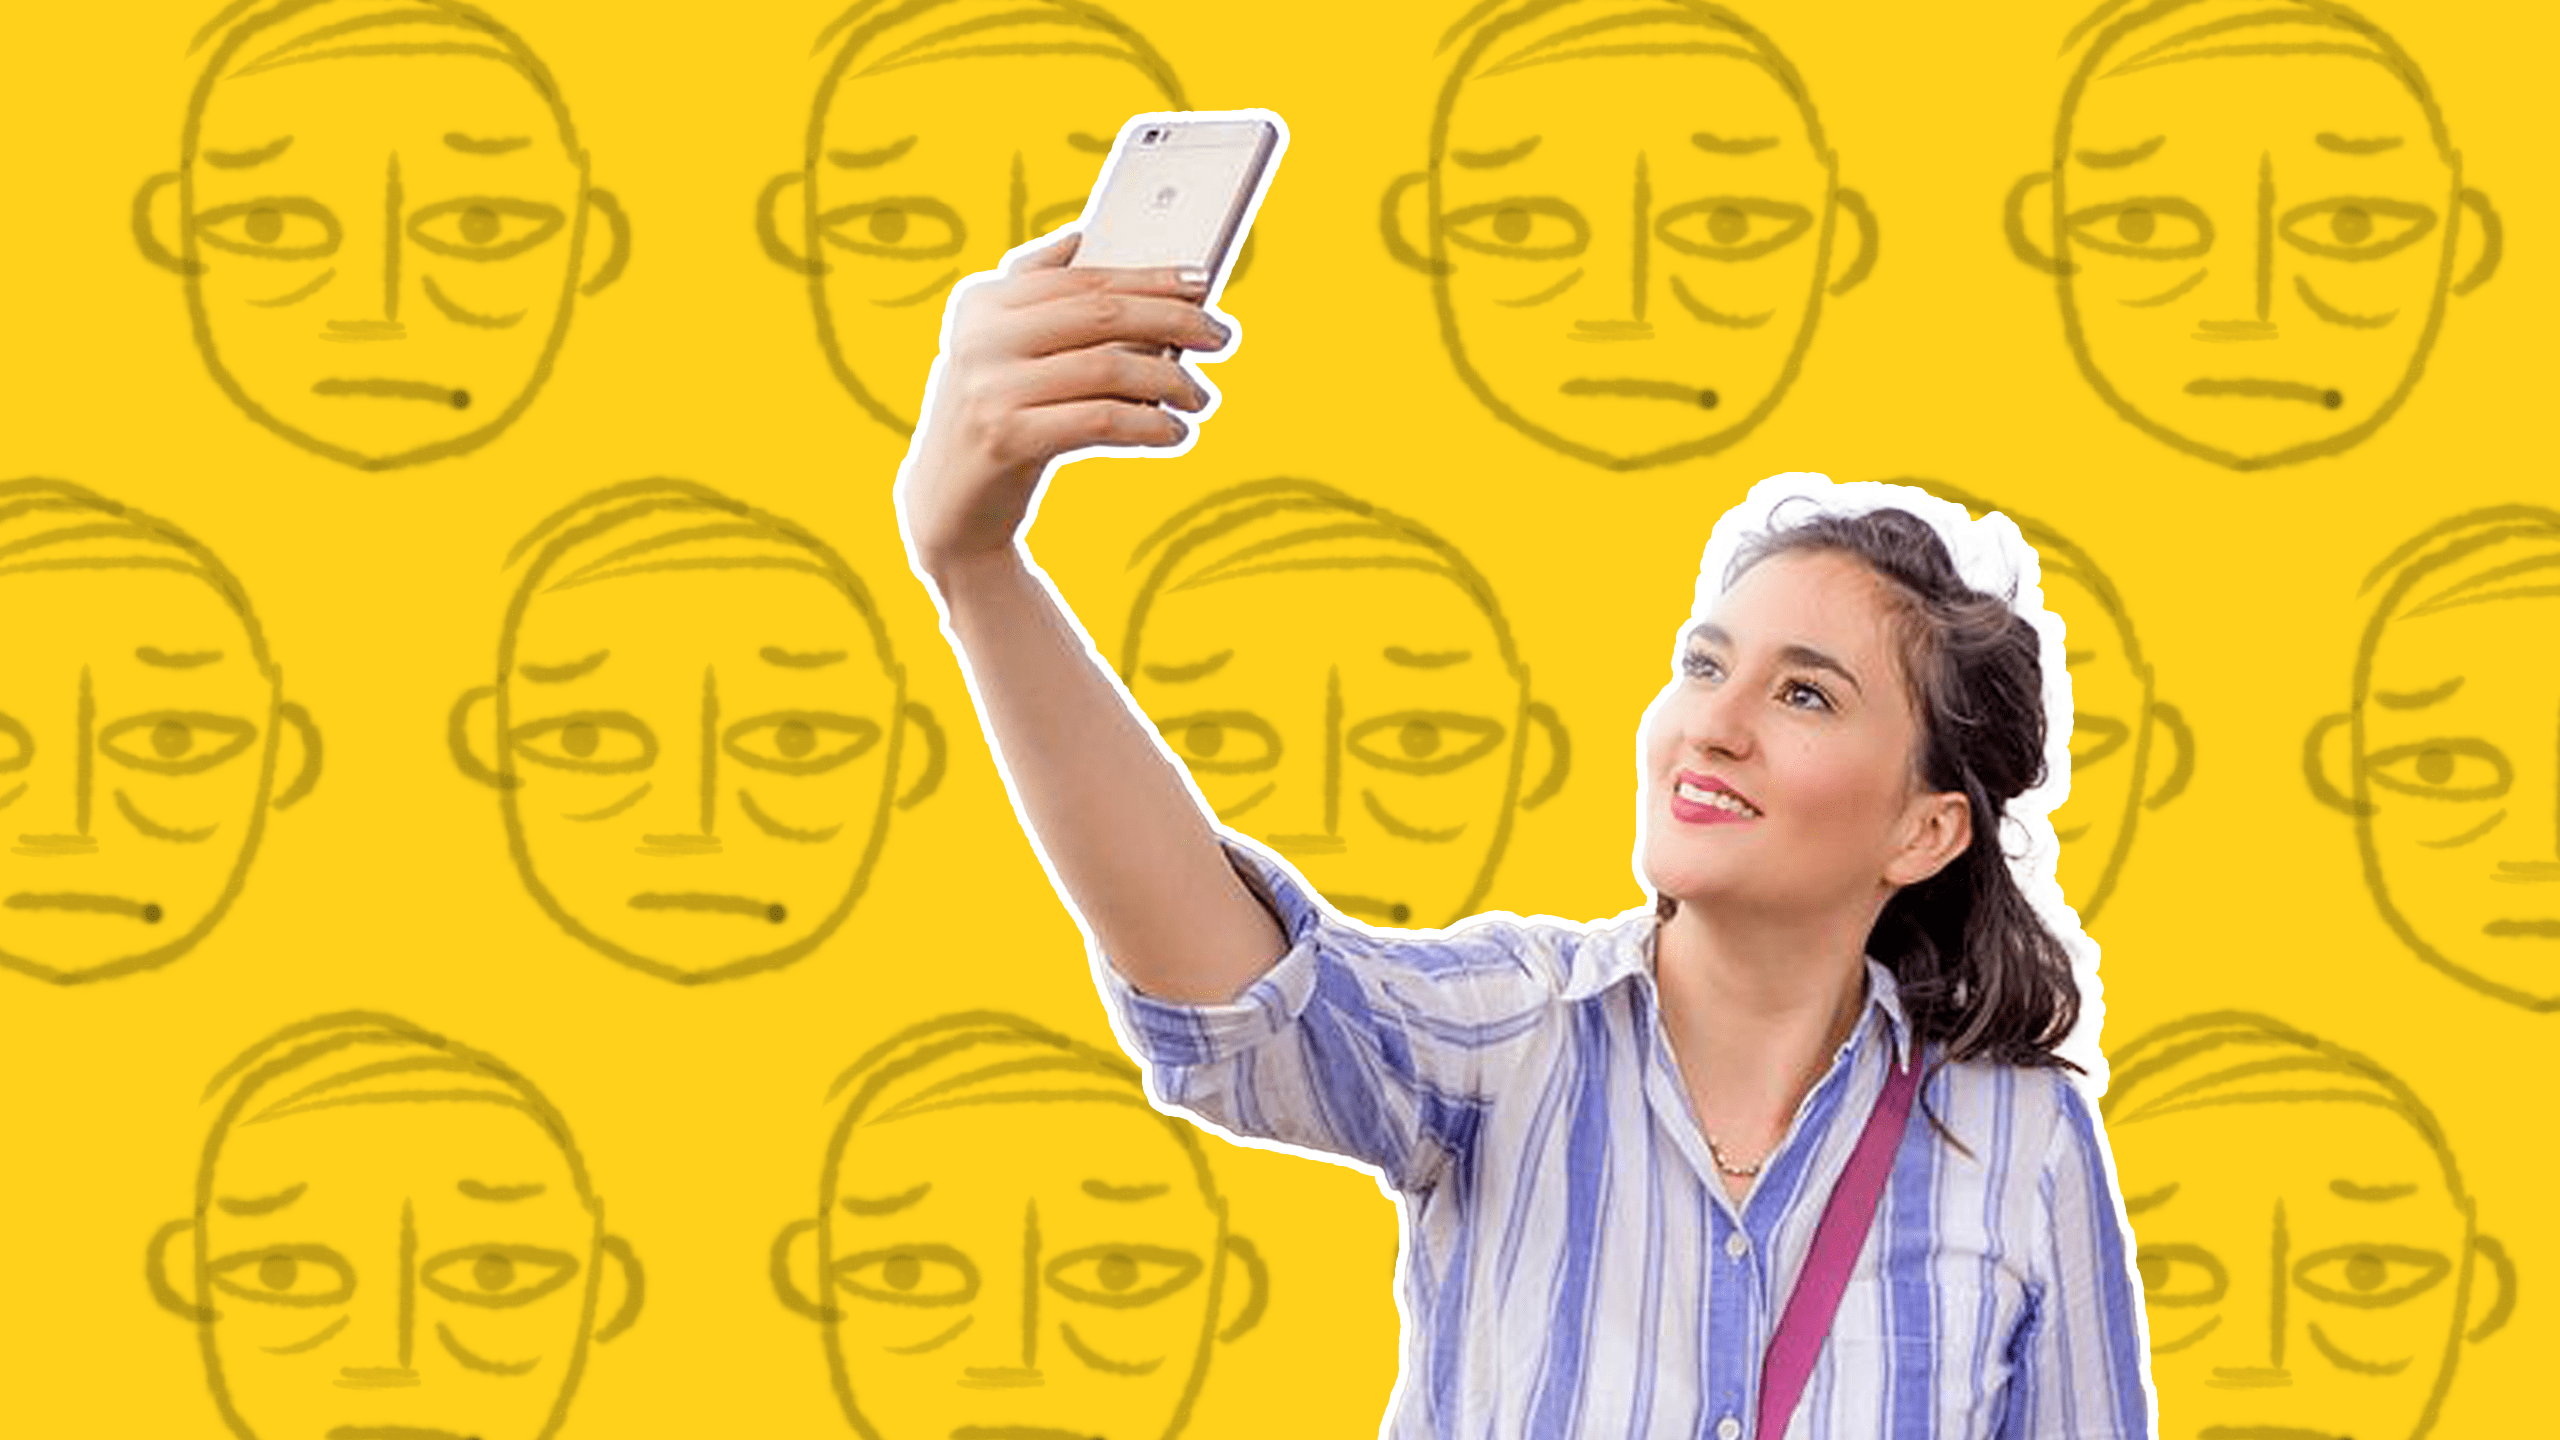 A woman taking a selfie with a bunch of disapproving faces behind her.